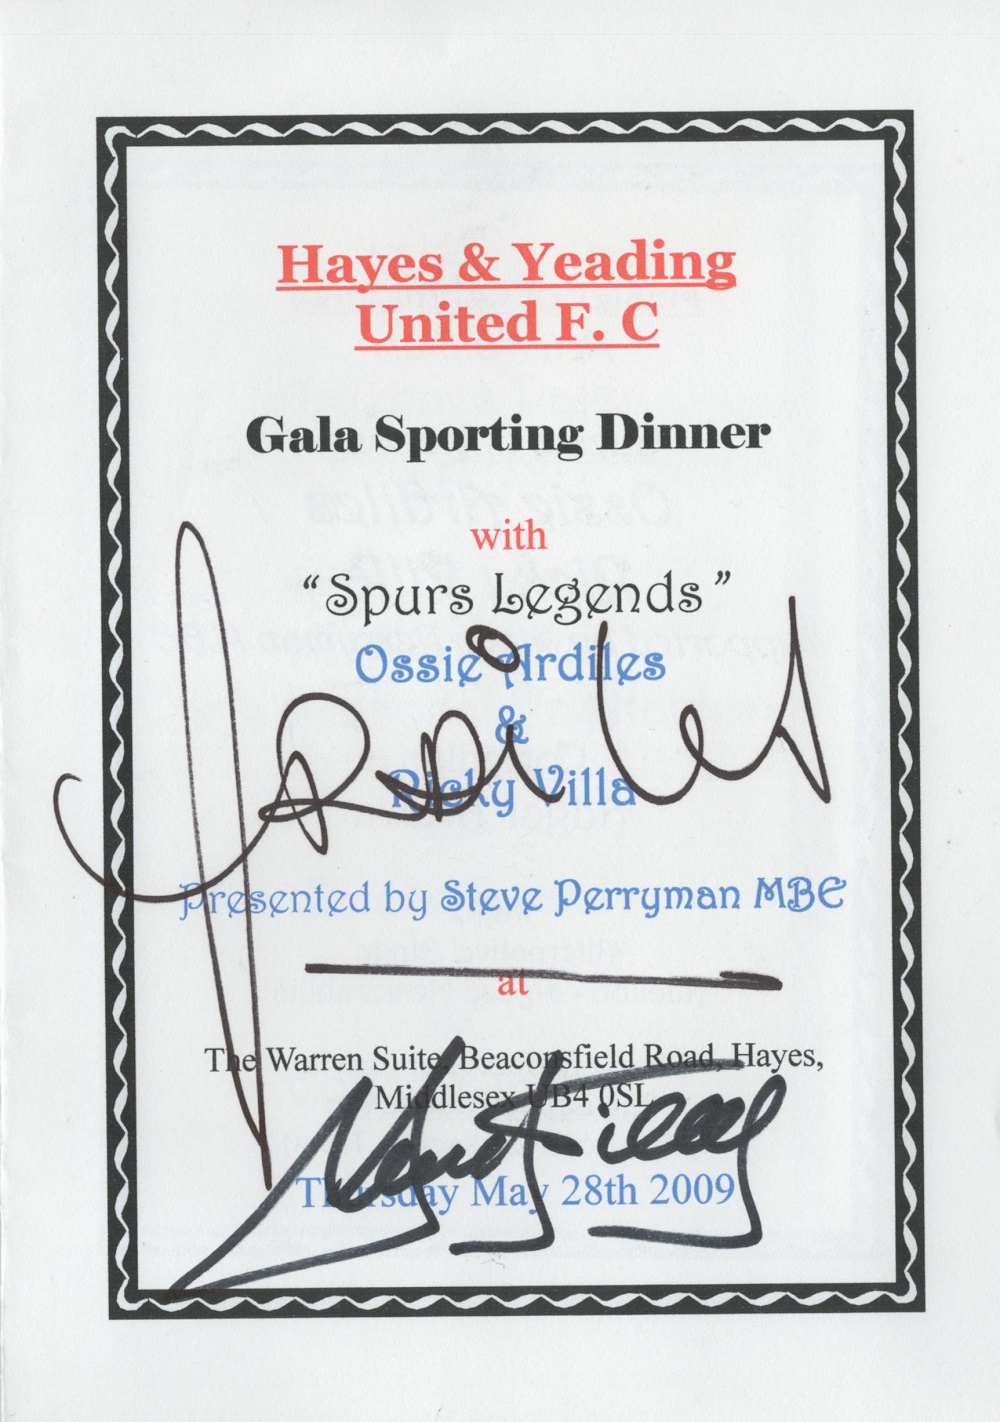 Football Spurs Legends multi signed Hayes and Yeading Gala Sporting Dinner dated 28th May 2009